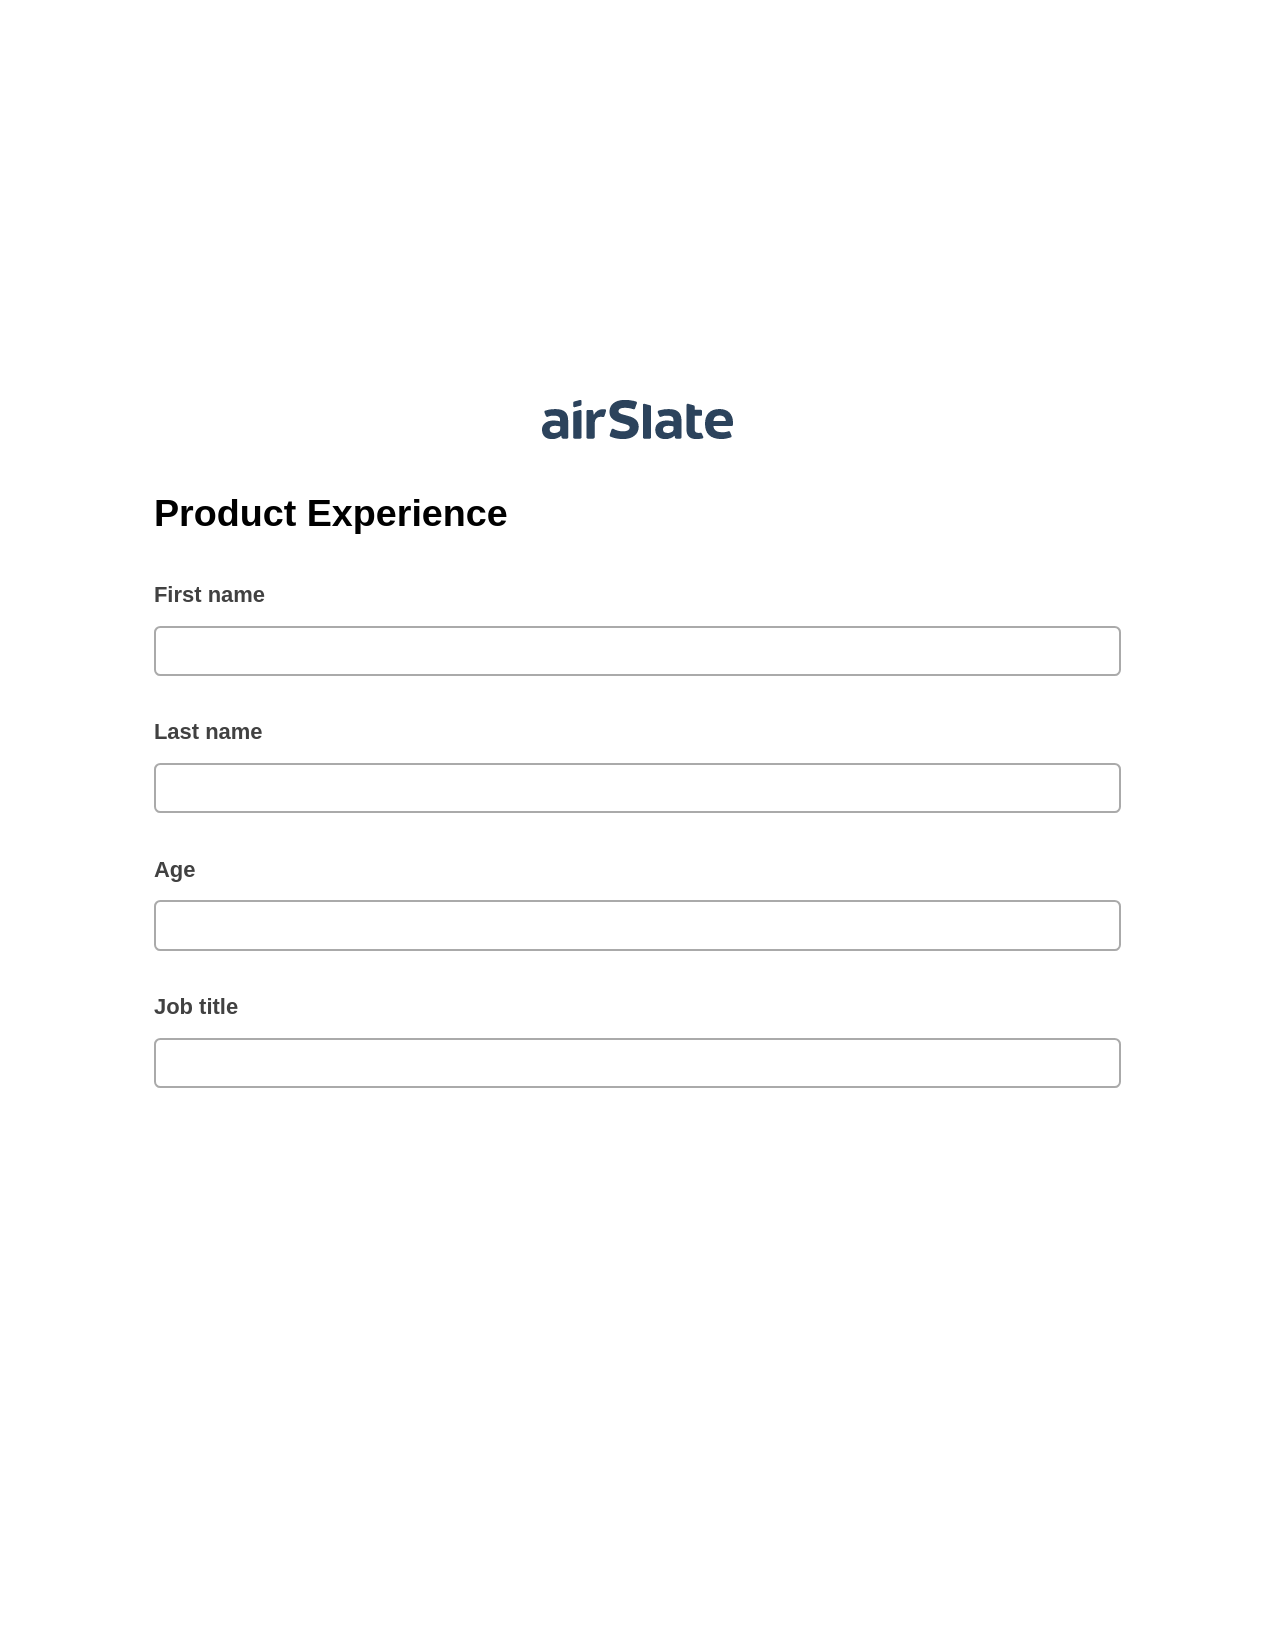 Product Experience Pre-fill from MS Dynamics 365 Records, Webhook Bot, Export to Google Sheet Bot